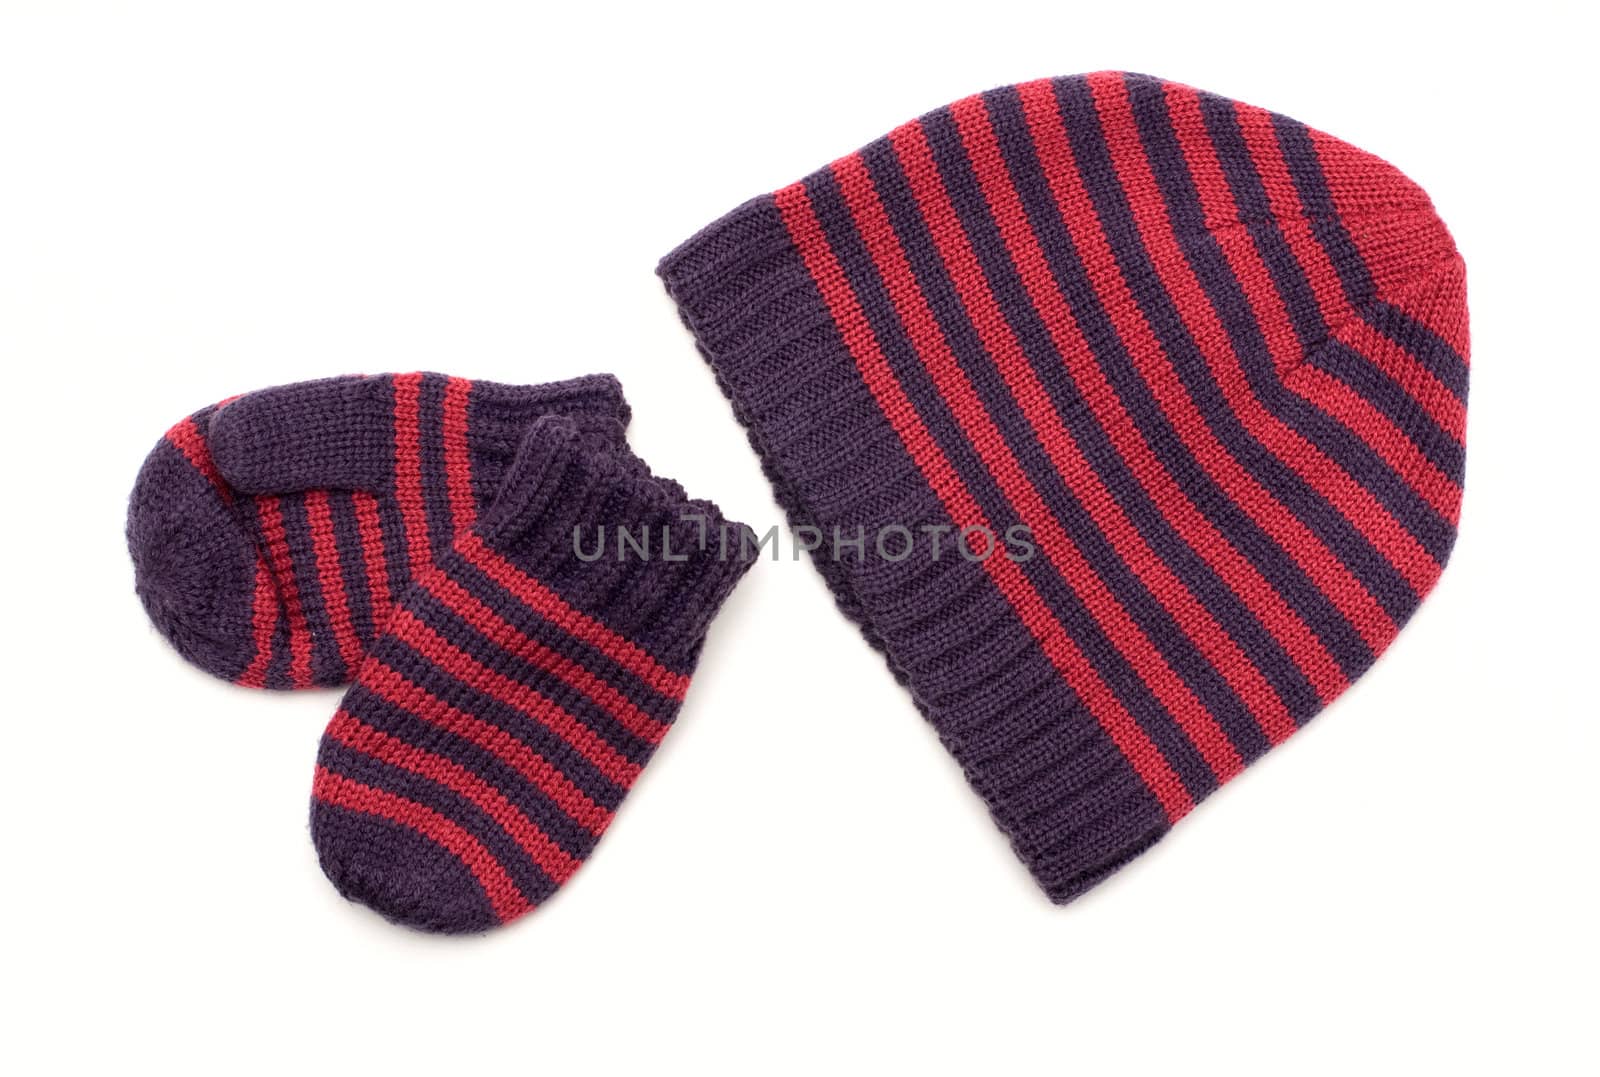 knitted hat with stripes isolated